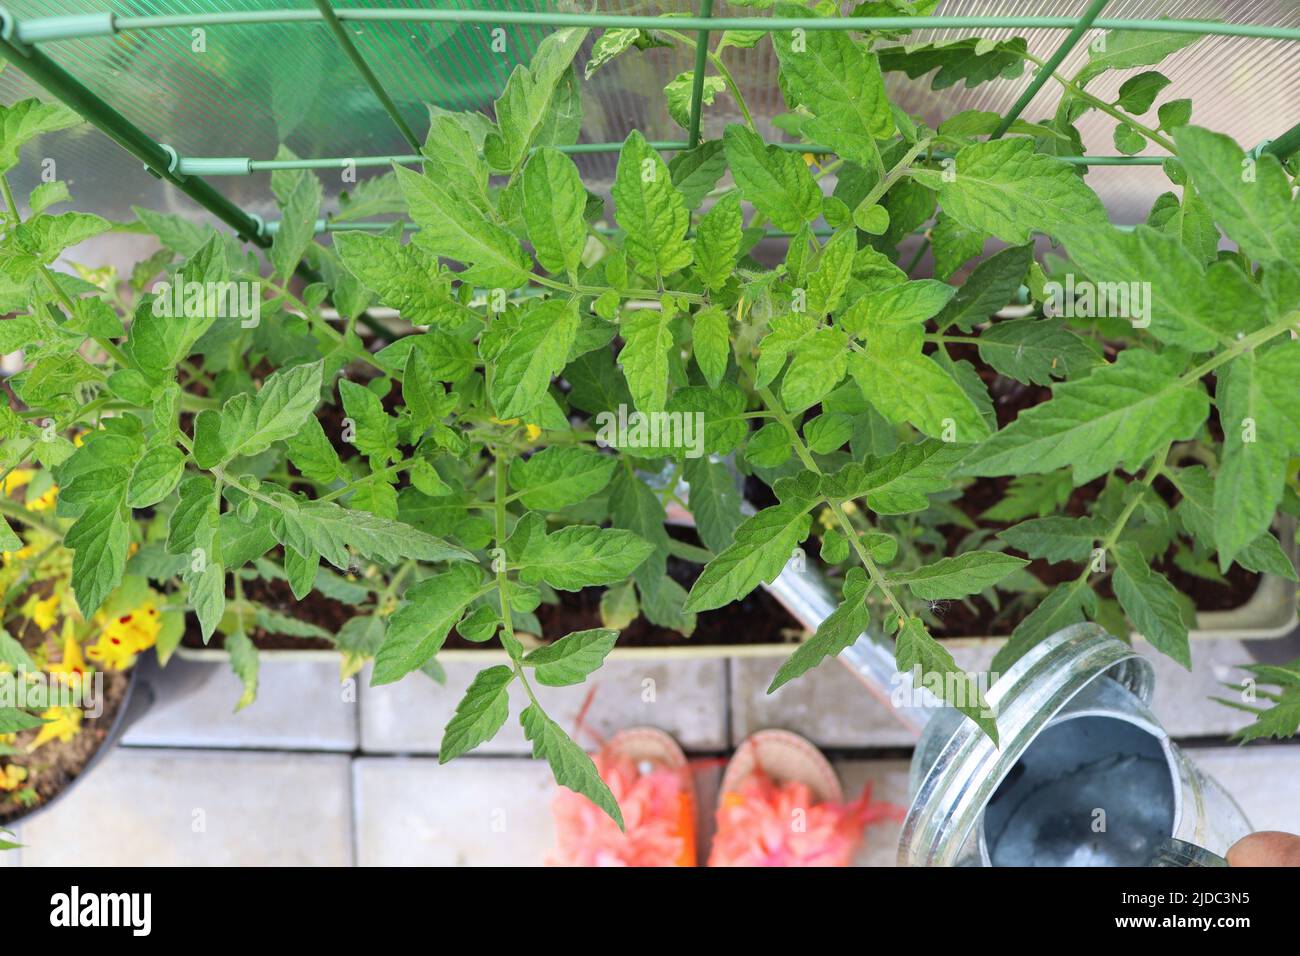 Tomatoes growing in container. Women gardener watering plants. Container vegetables gardening. Vegetable garden on a terrace. Top view Stock Photo